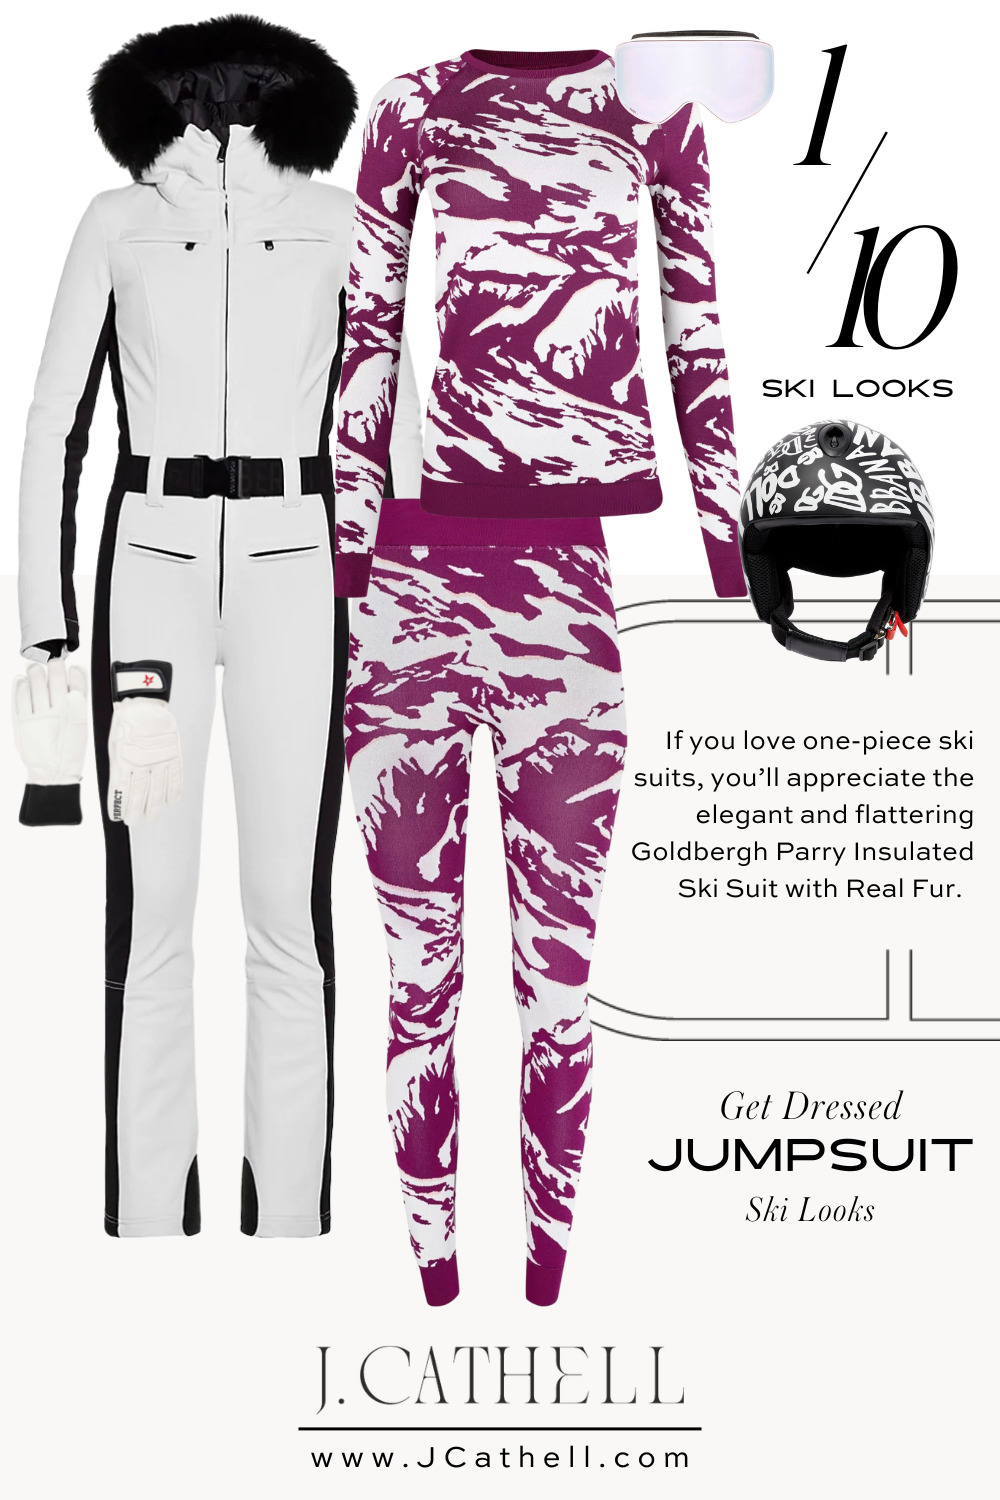 The Best Ski Looks for Your Winter Getaway - J. Cathell